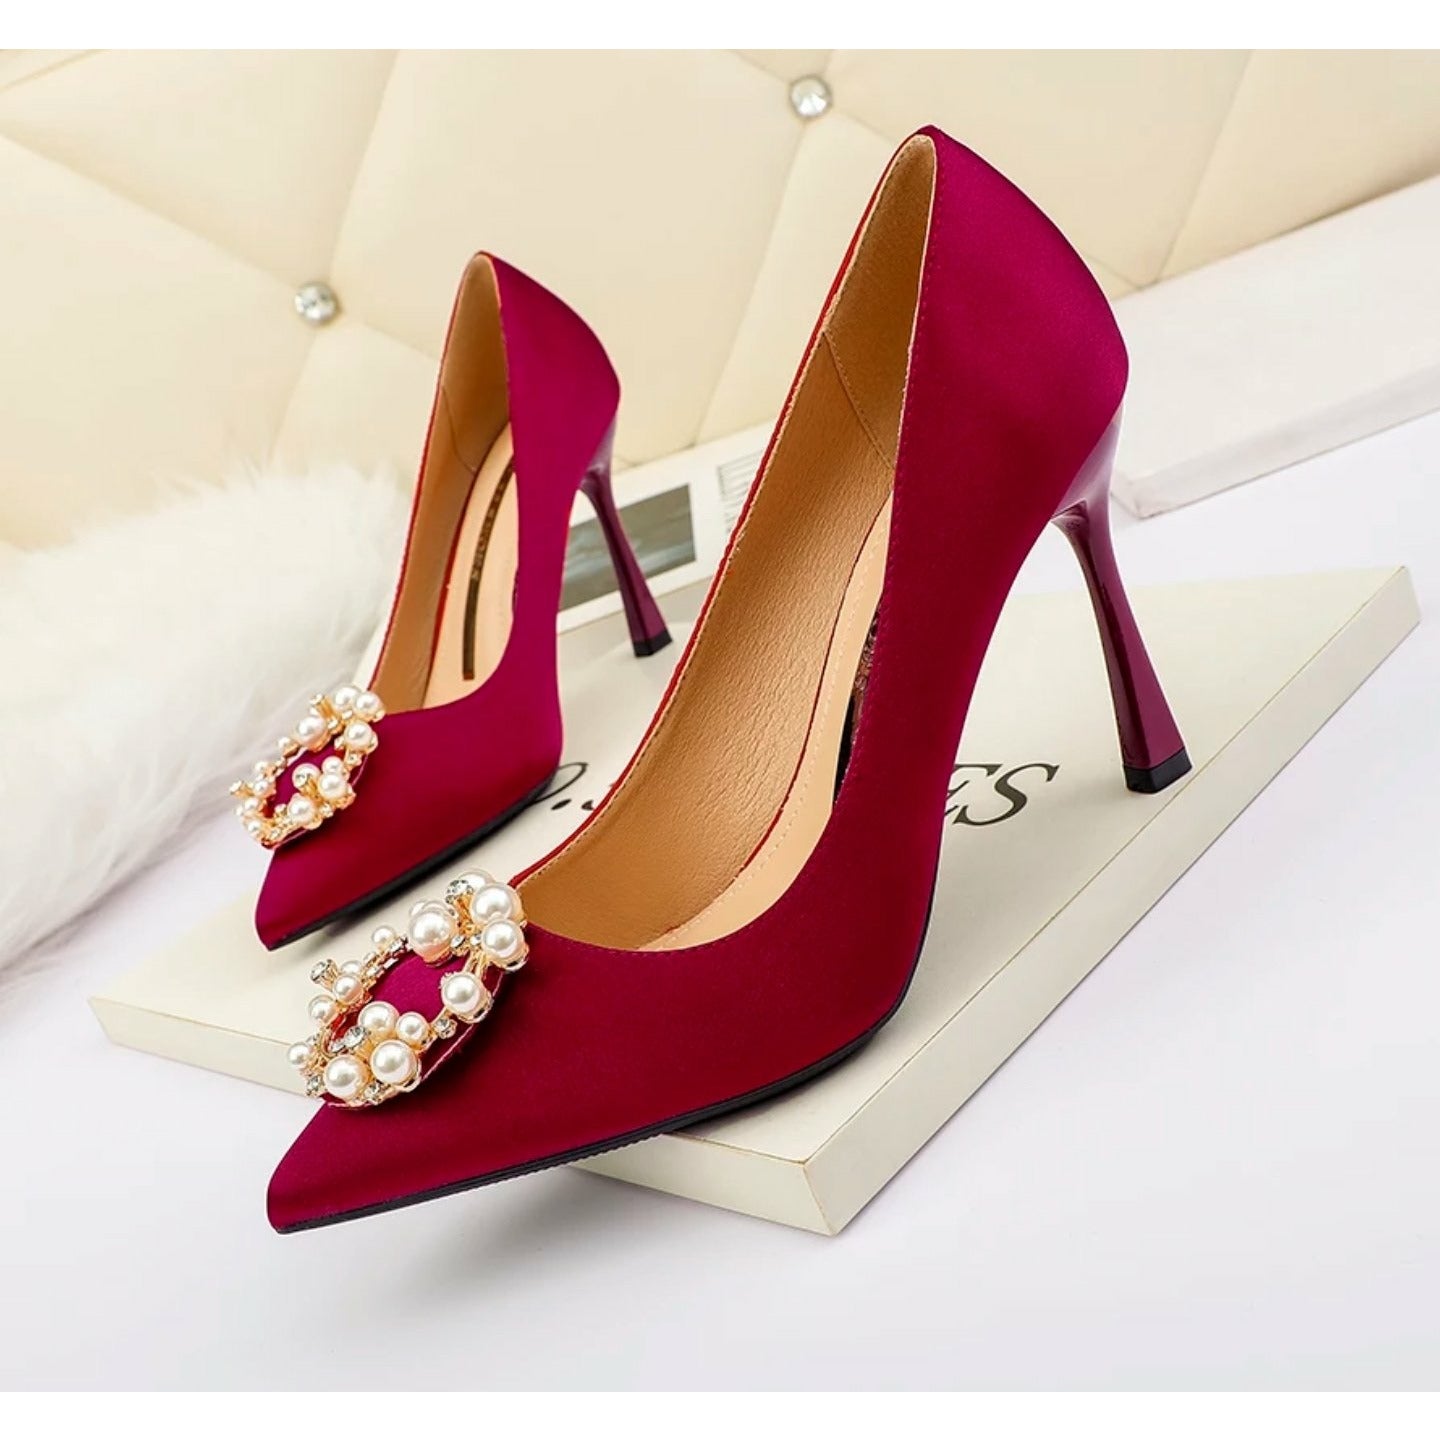 Image in Shoes collection by ~luxurious Taste~